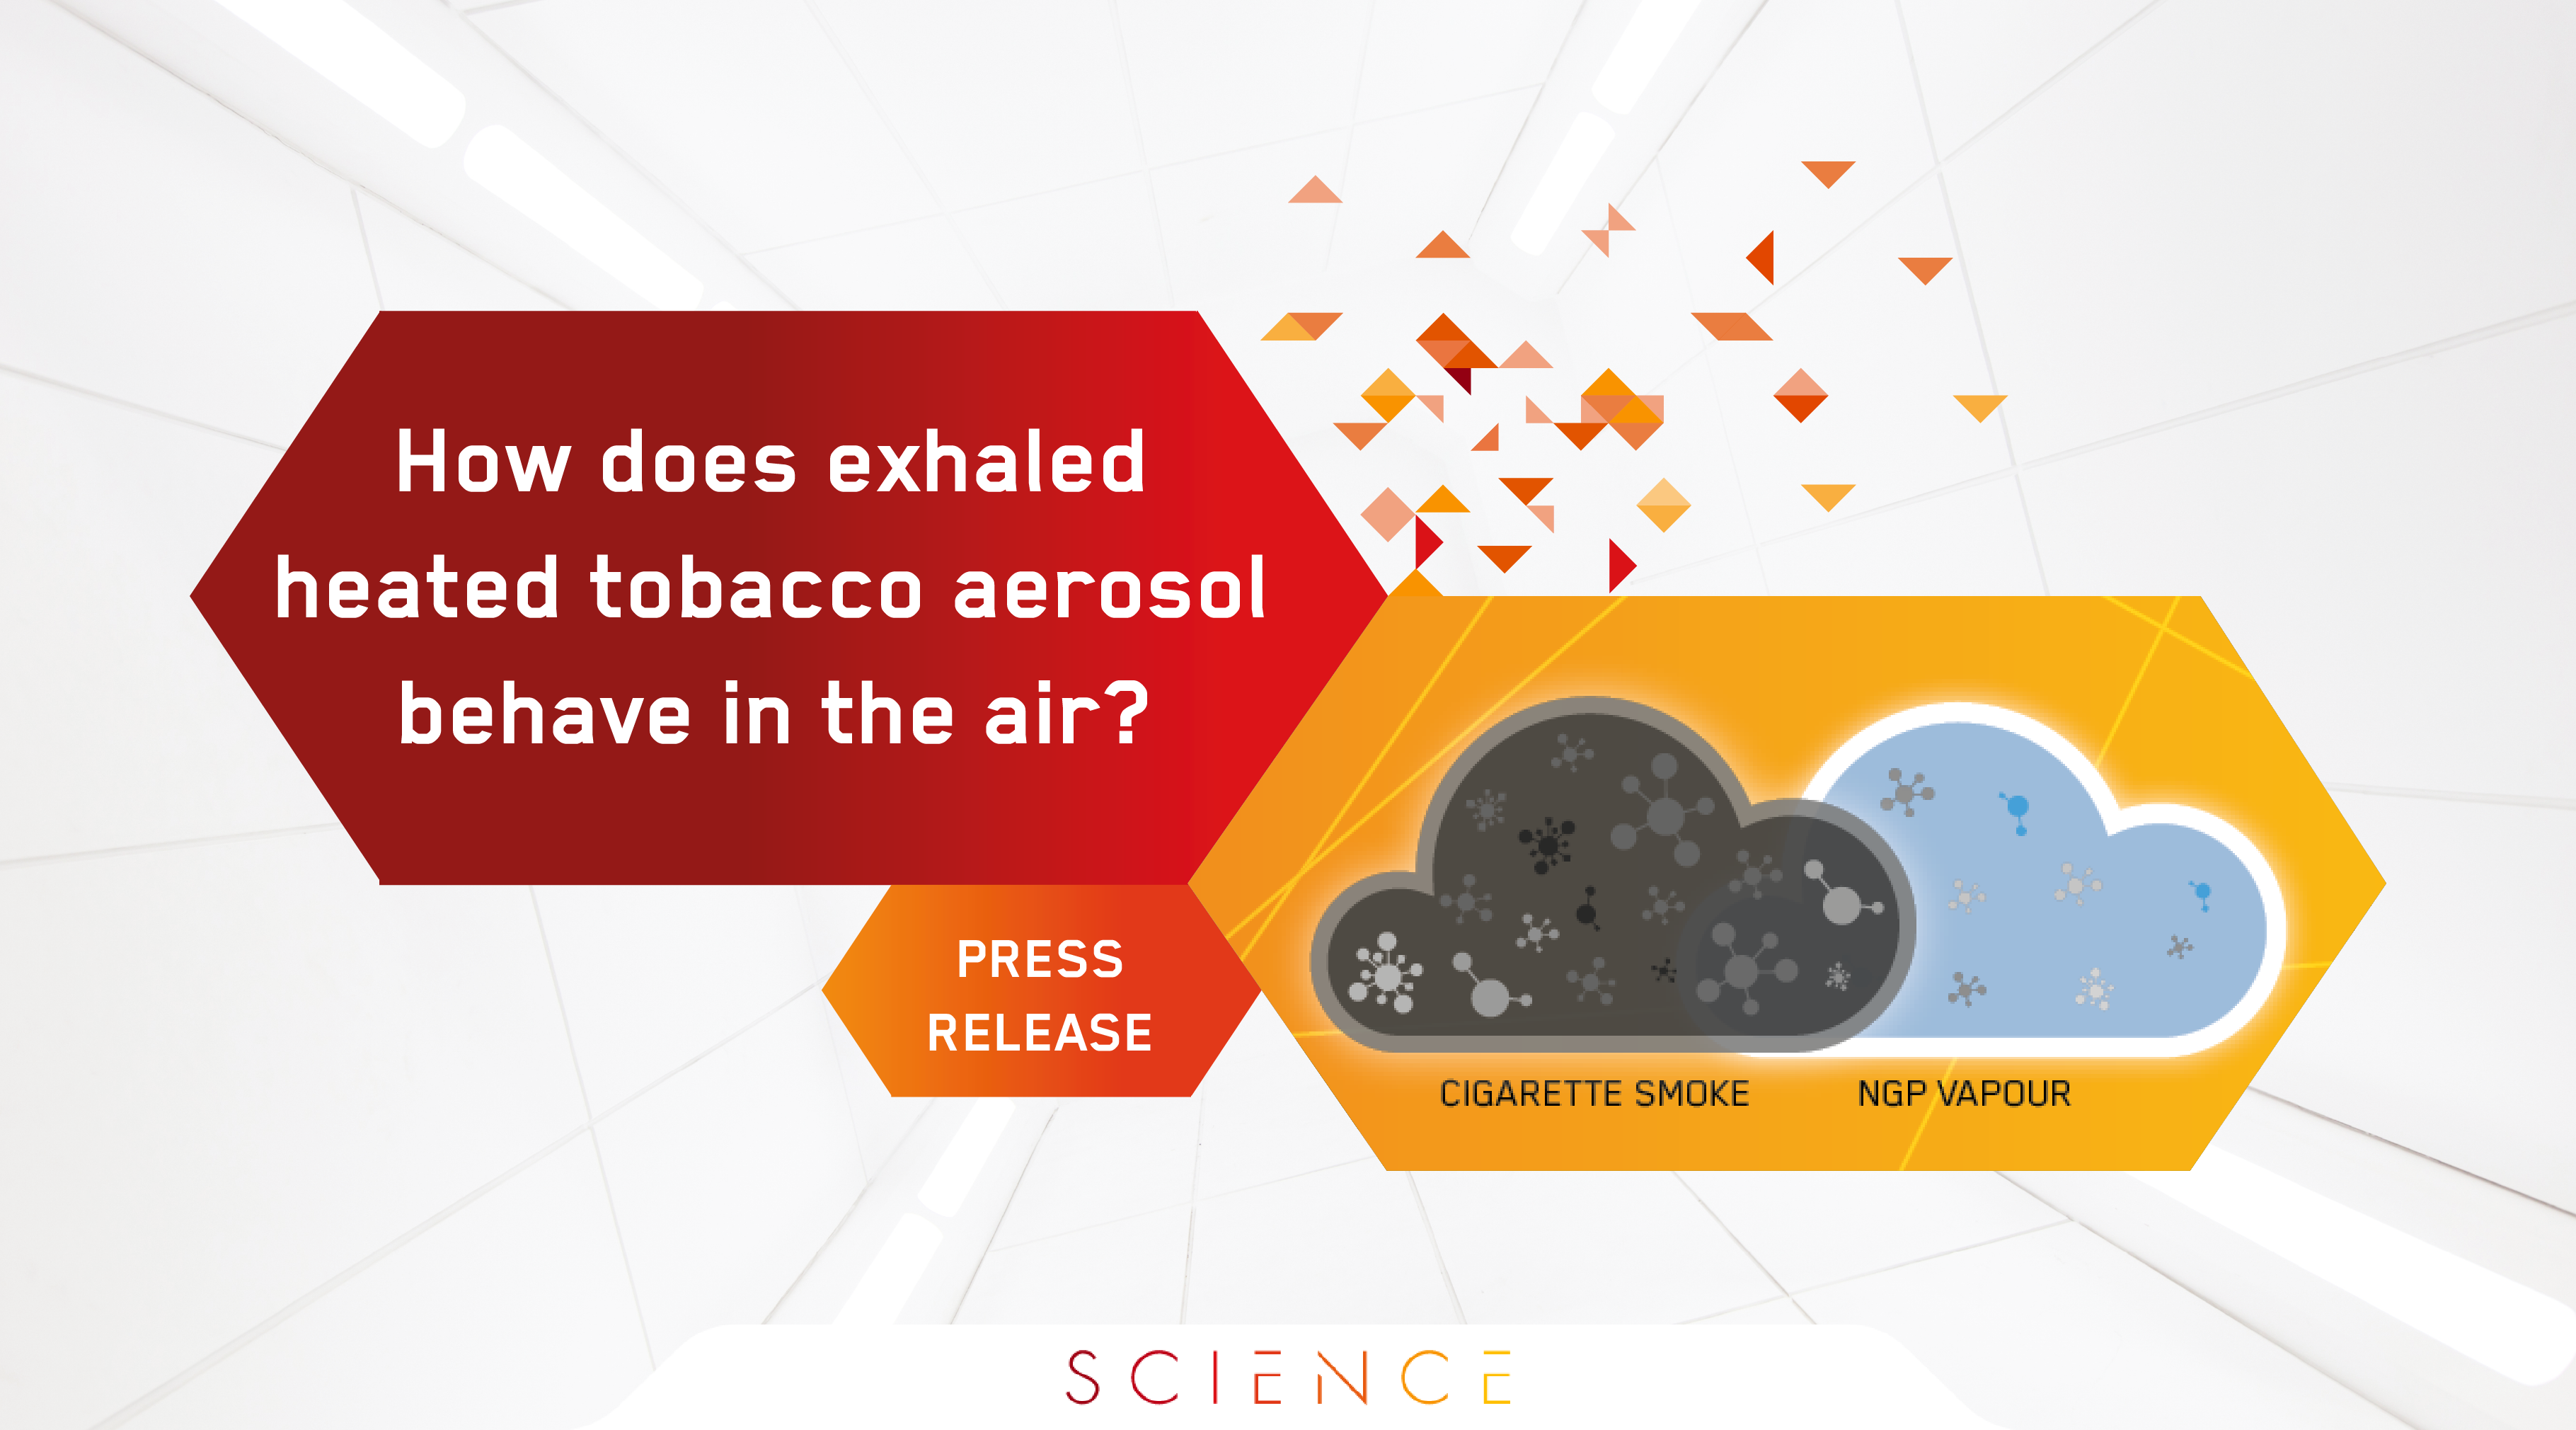 Press release: How does exhaled heated tobacco aerosol behave in the air?